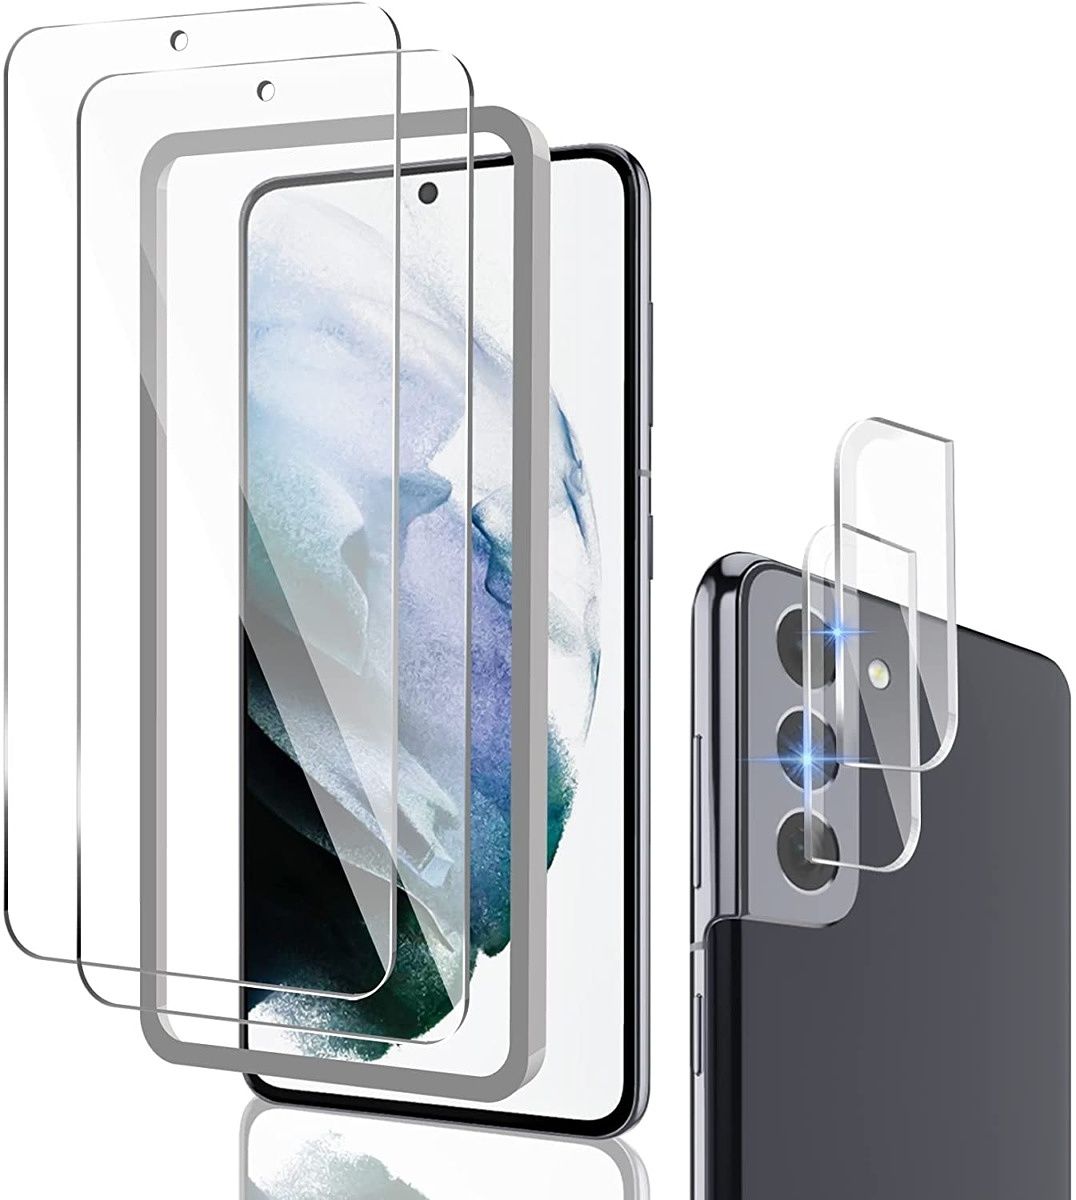 This tempered glass screen protector comes with 2.5D curved edges making it feel smoother when swiping across the edges. It also comes with 2 camera protectors and an alignment tray.